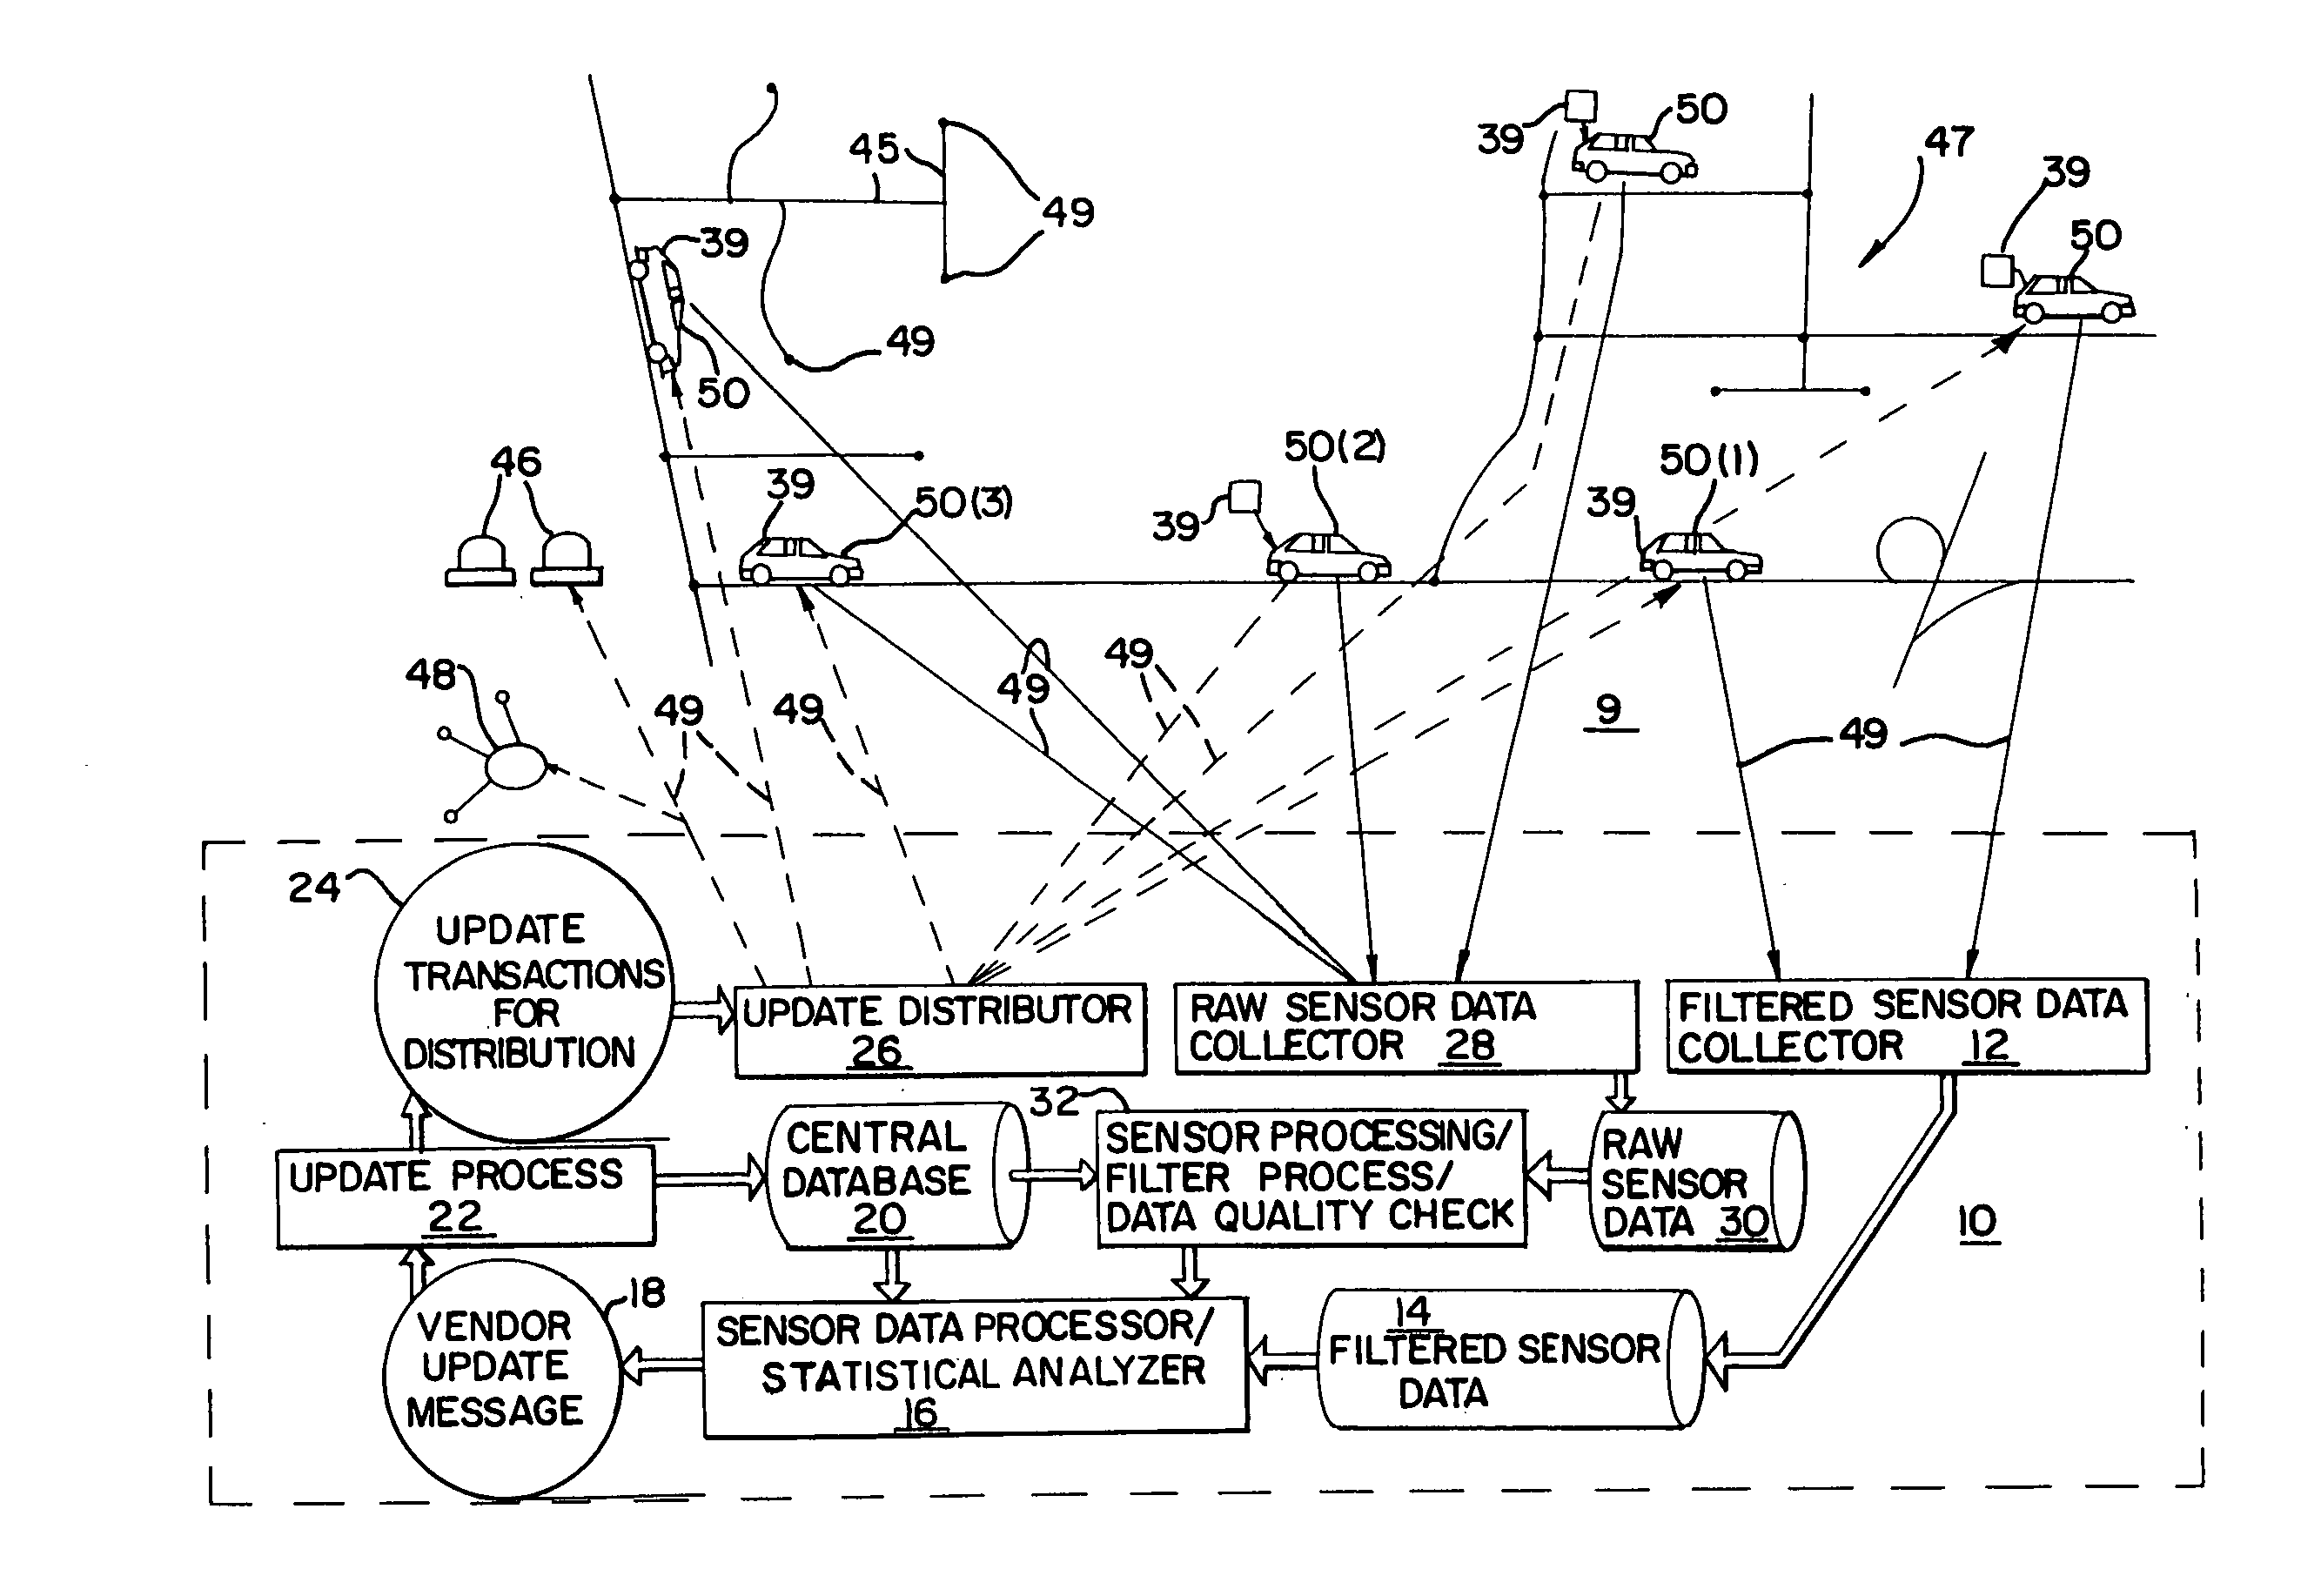 System and method for updating, enhancing, or refining a geographic database using feedback